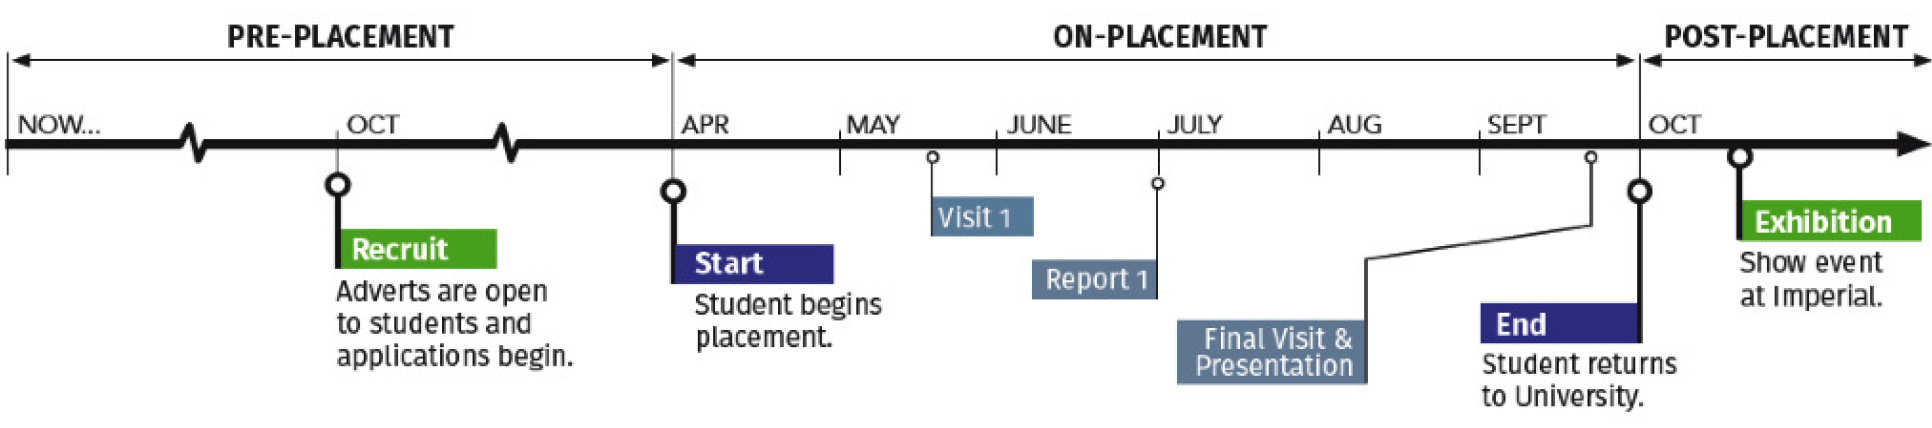 Industrial placements key dates and timeline